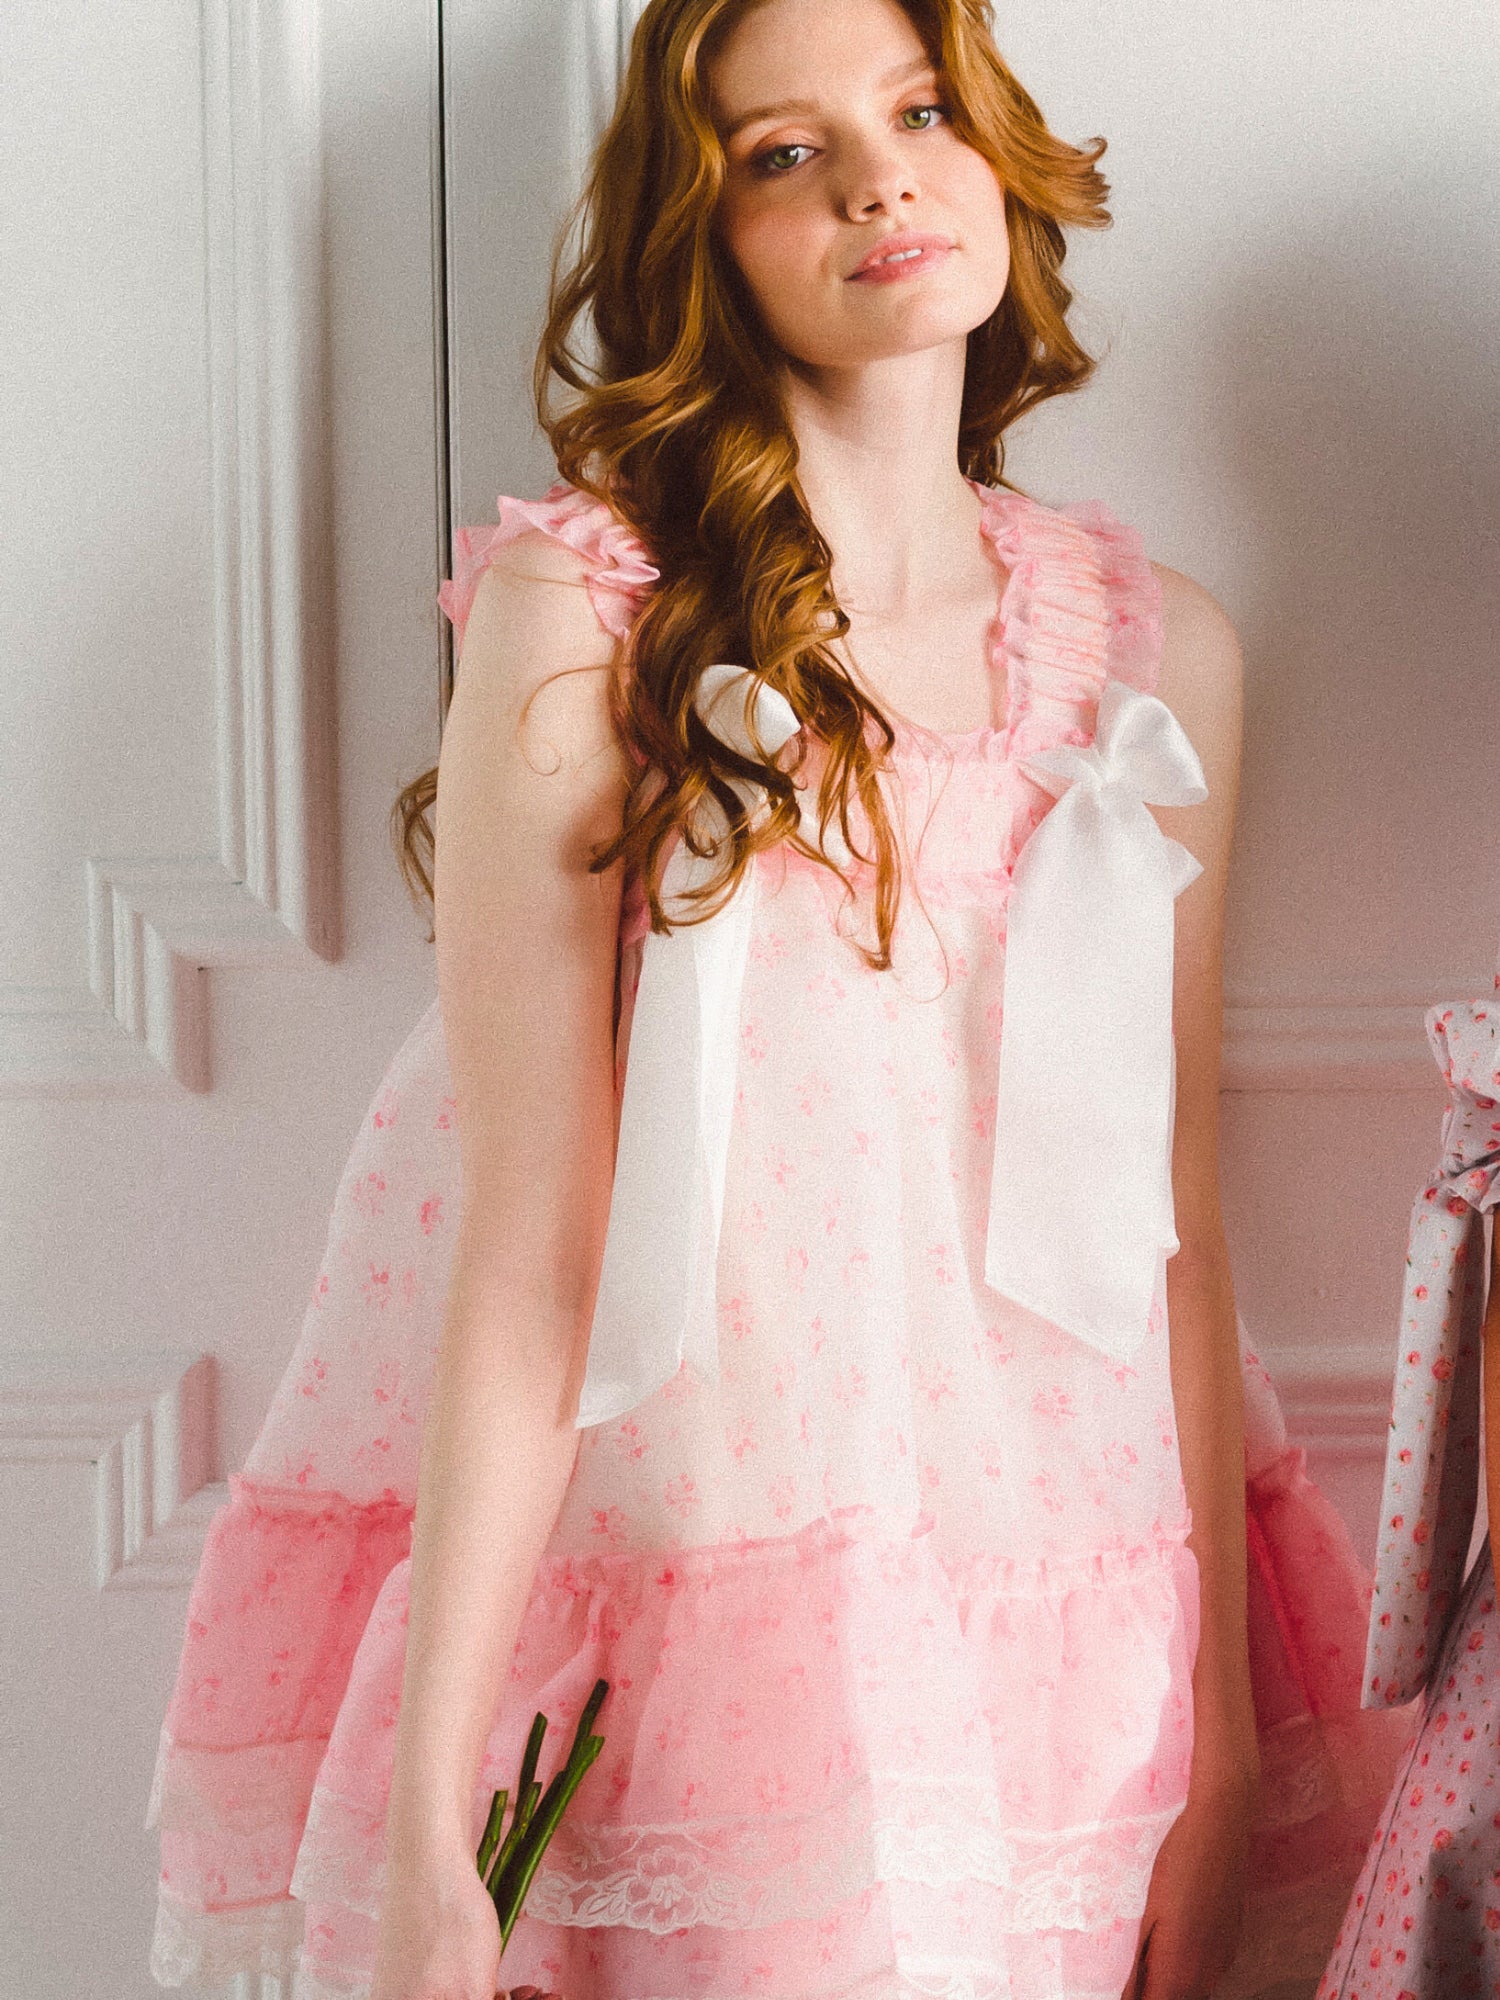 The Parfait Poet Baby Antoinette Peignoir - The Parfait Poet Peignoir by Selkie Collection is a dress made for the fairytale lover, the daydreamer, and the coquette obsessed. Adorned in pink, ruffles, and giant bows this is a dress that can be worn on a n